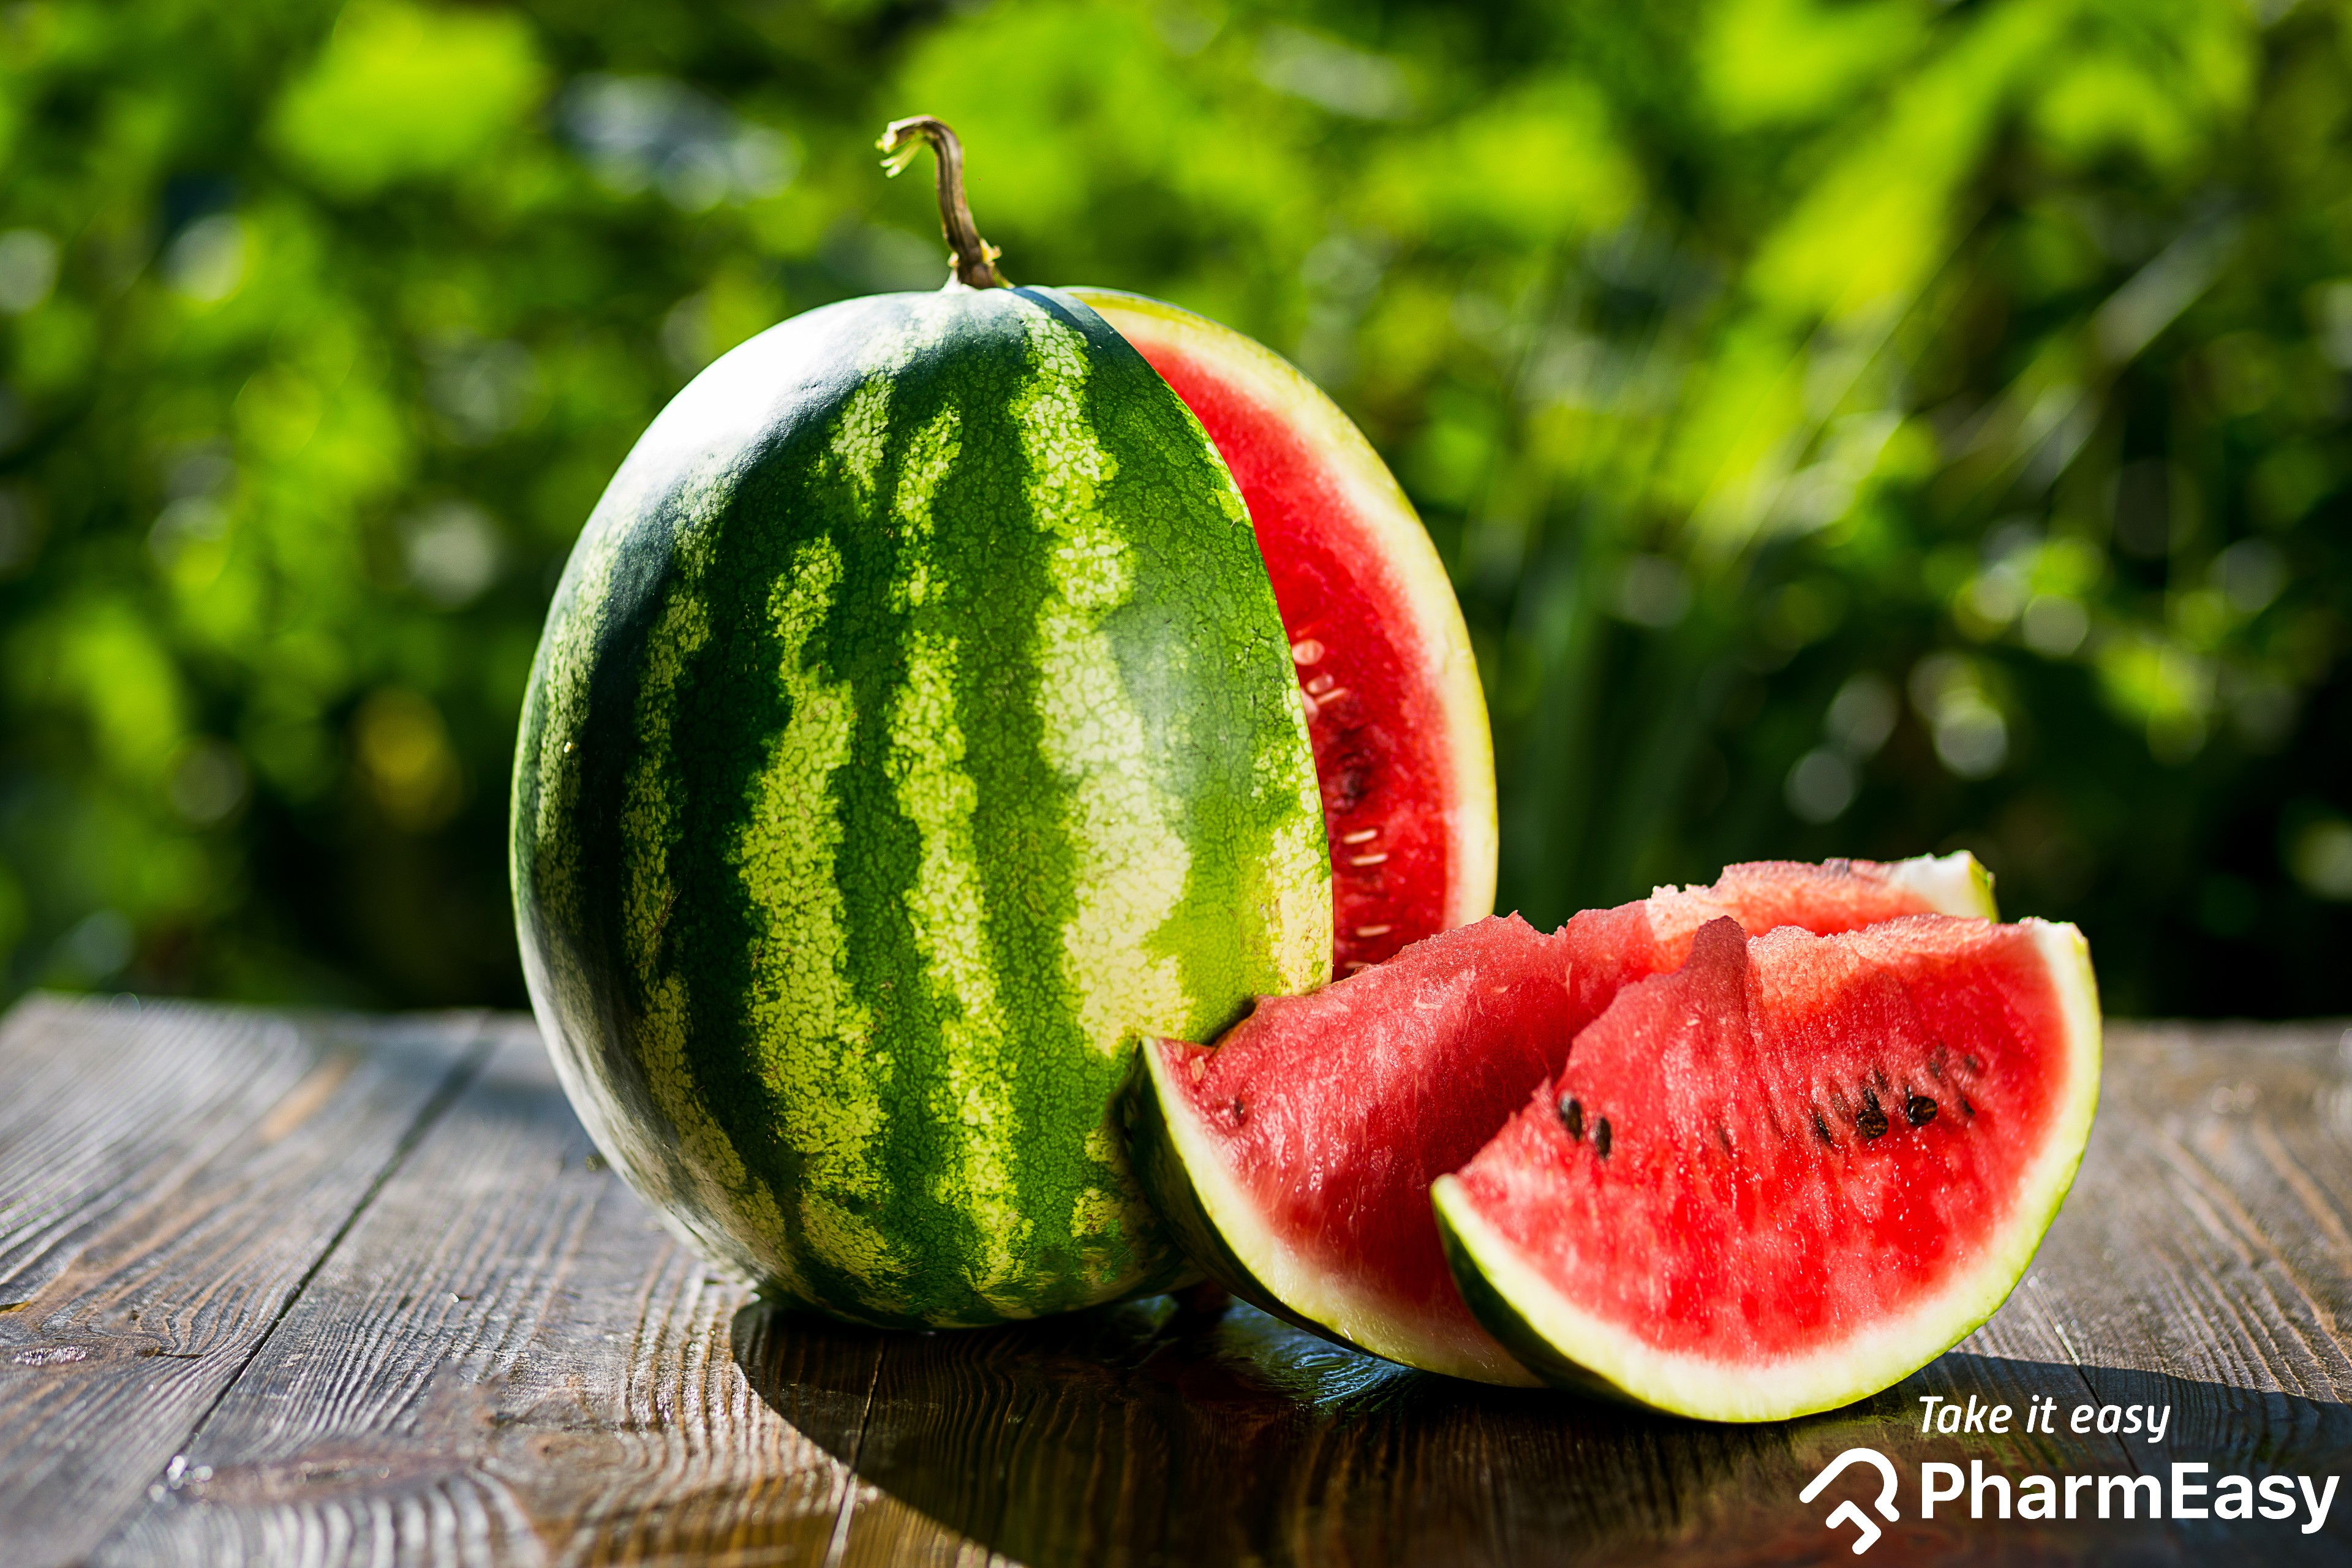 Learn 9 Magical health benefits of watermelon seeds at PharmEasy